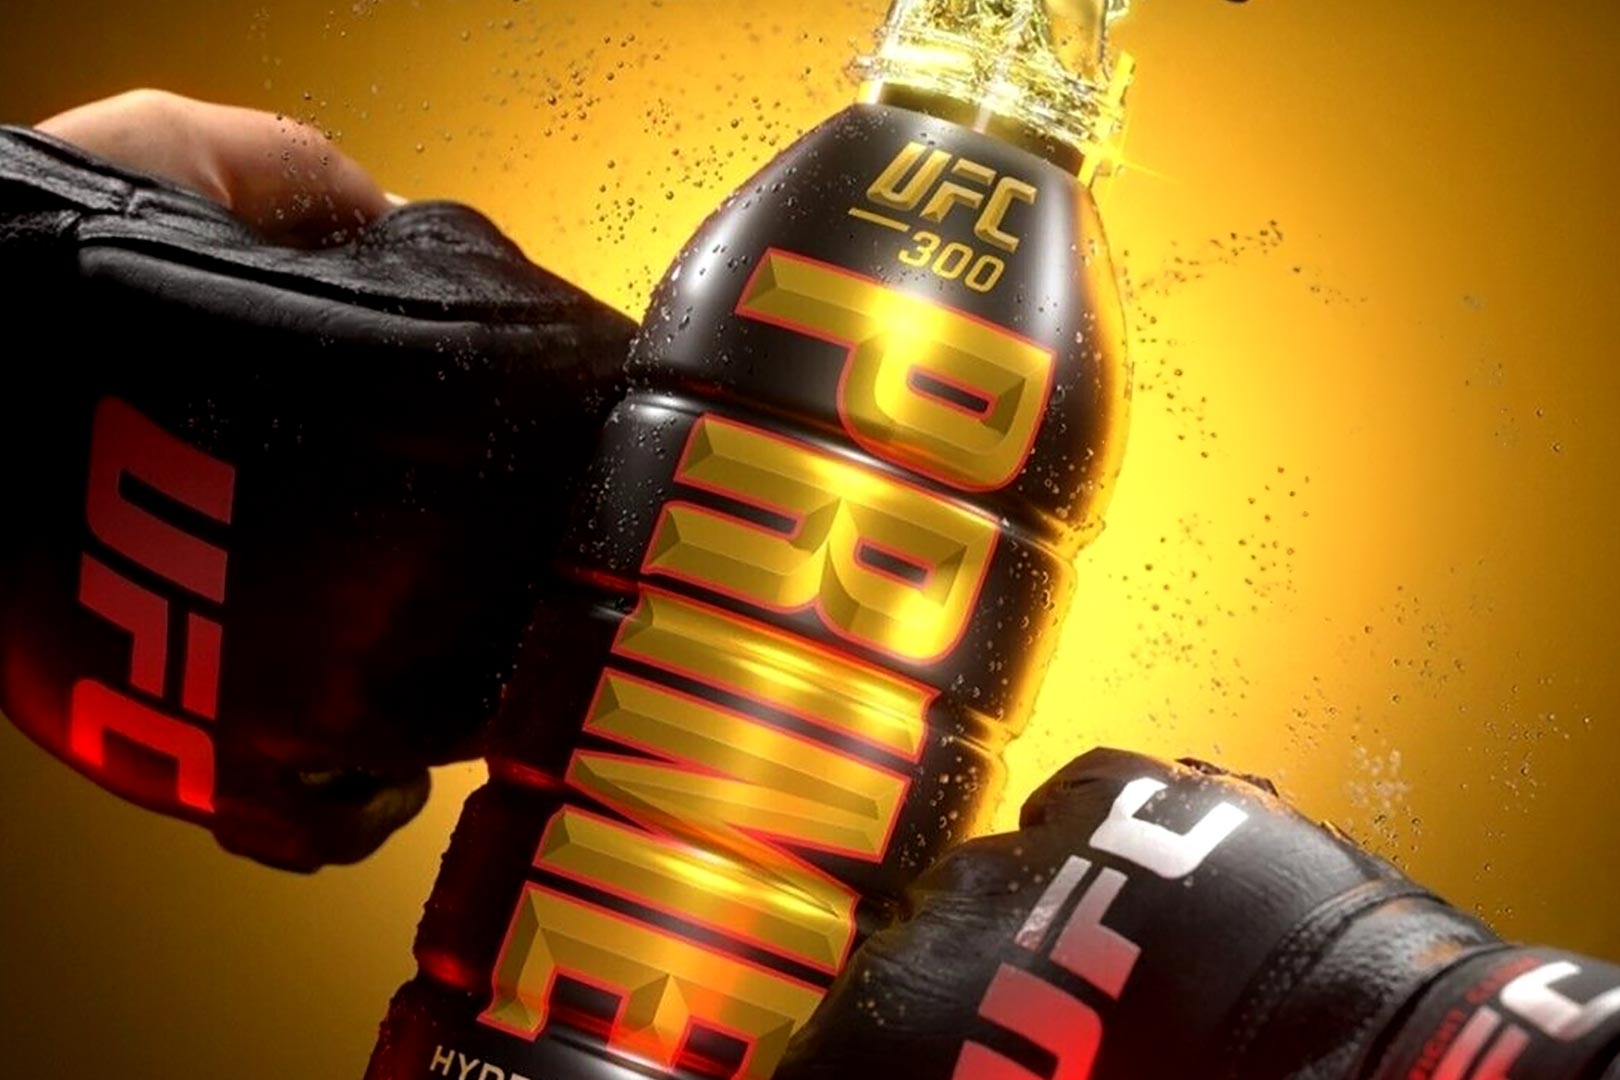 What Does Ufc 300 Prime Hydration Drink Taste Like